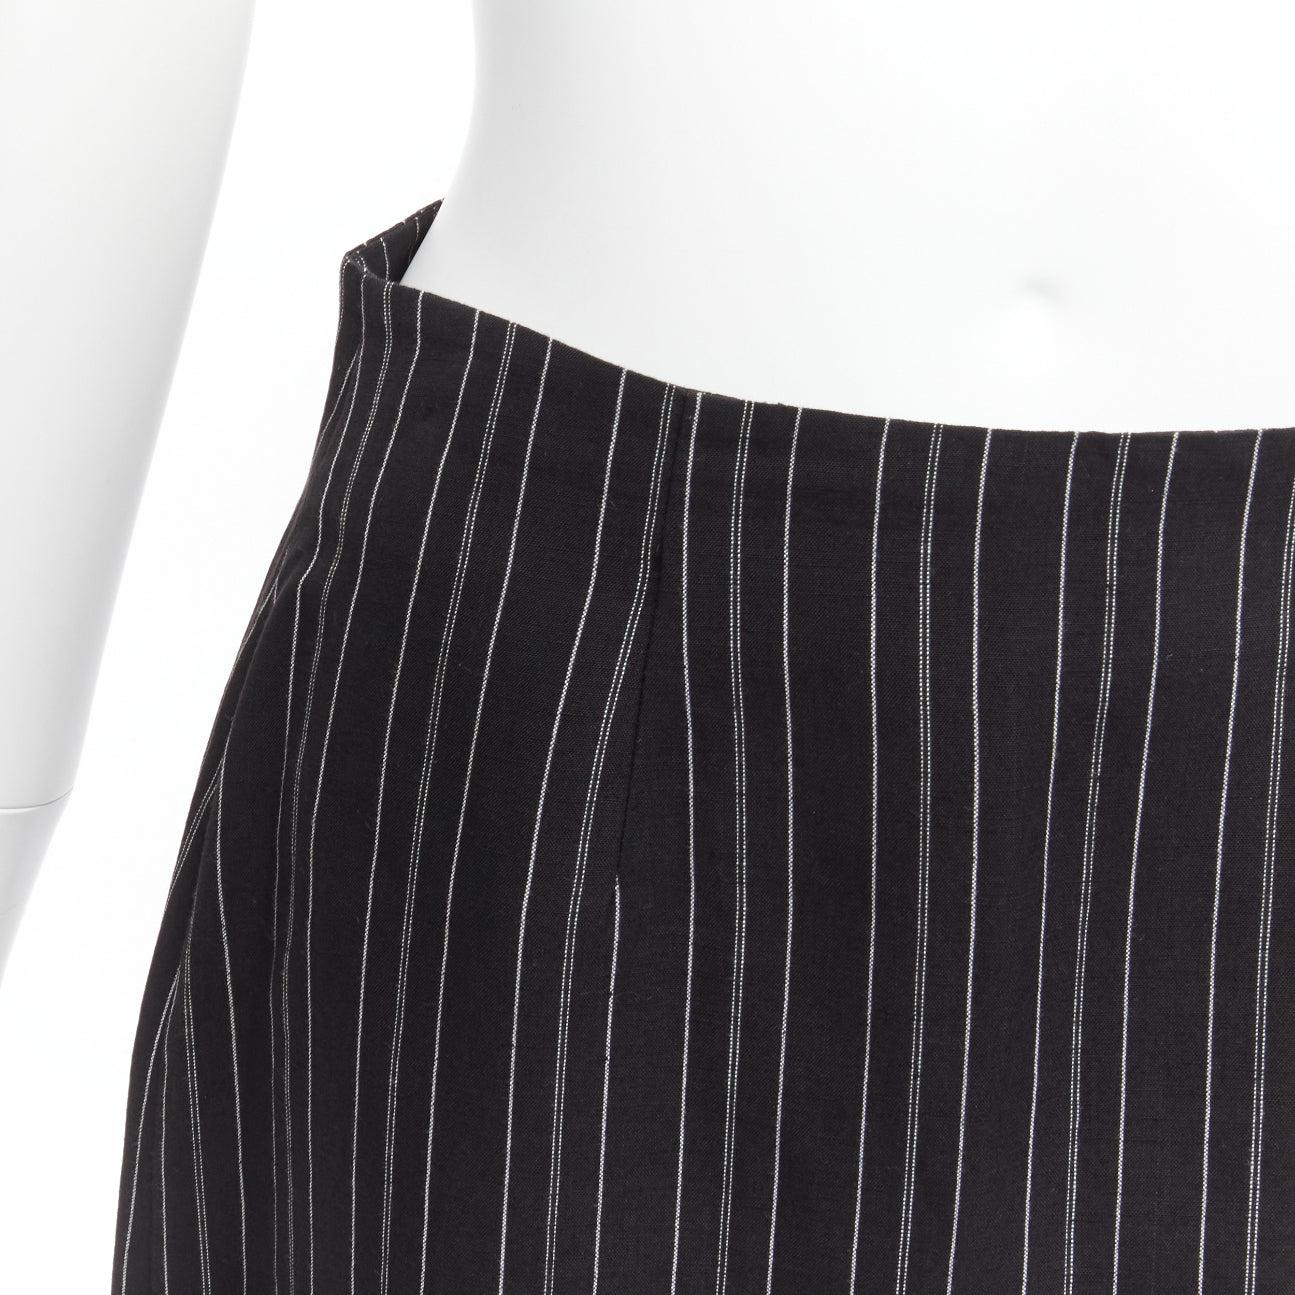 DOLCE GABBANA Vintage black pinstriped high waist darted mini Skirt IT40 S
Reference: GIYG/A00352
Brand: Dolce Gabbana
Designer: Domenico Dolce and Stefano Gabbana
Material: Rayon, Blend
Color: Black, White
Pattern: Pinstriped
Closure: Zip
Lining: